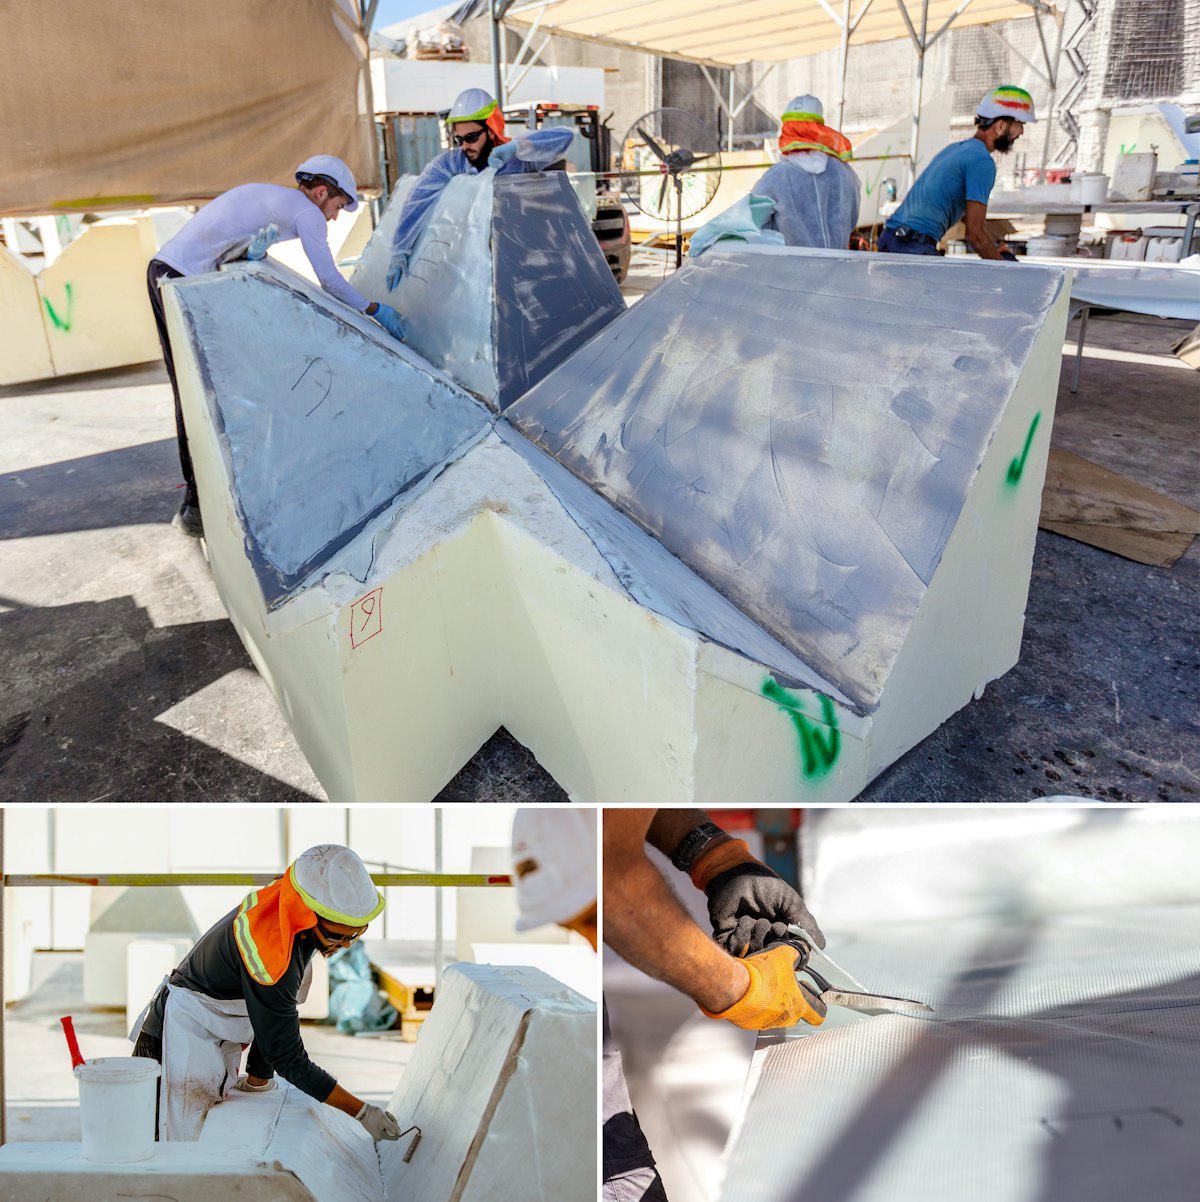 The formwork for the trellis is being prepared on site. EPS blocks are cut to the precise dimensions required for the trellis. The blocks are then reinforced with fiberglass allowing workers to walk on the forms while installing rebar, preparing the way for the concrete pour.